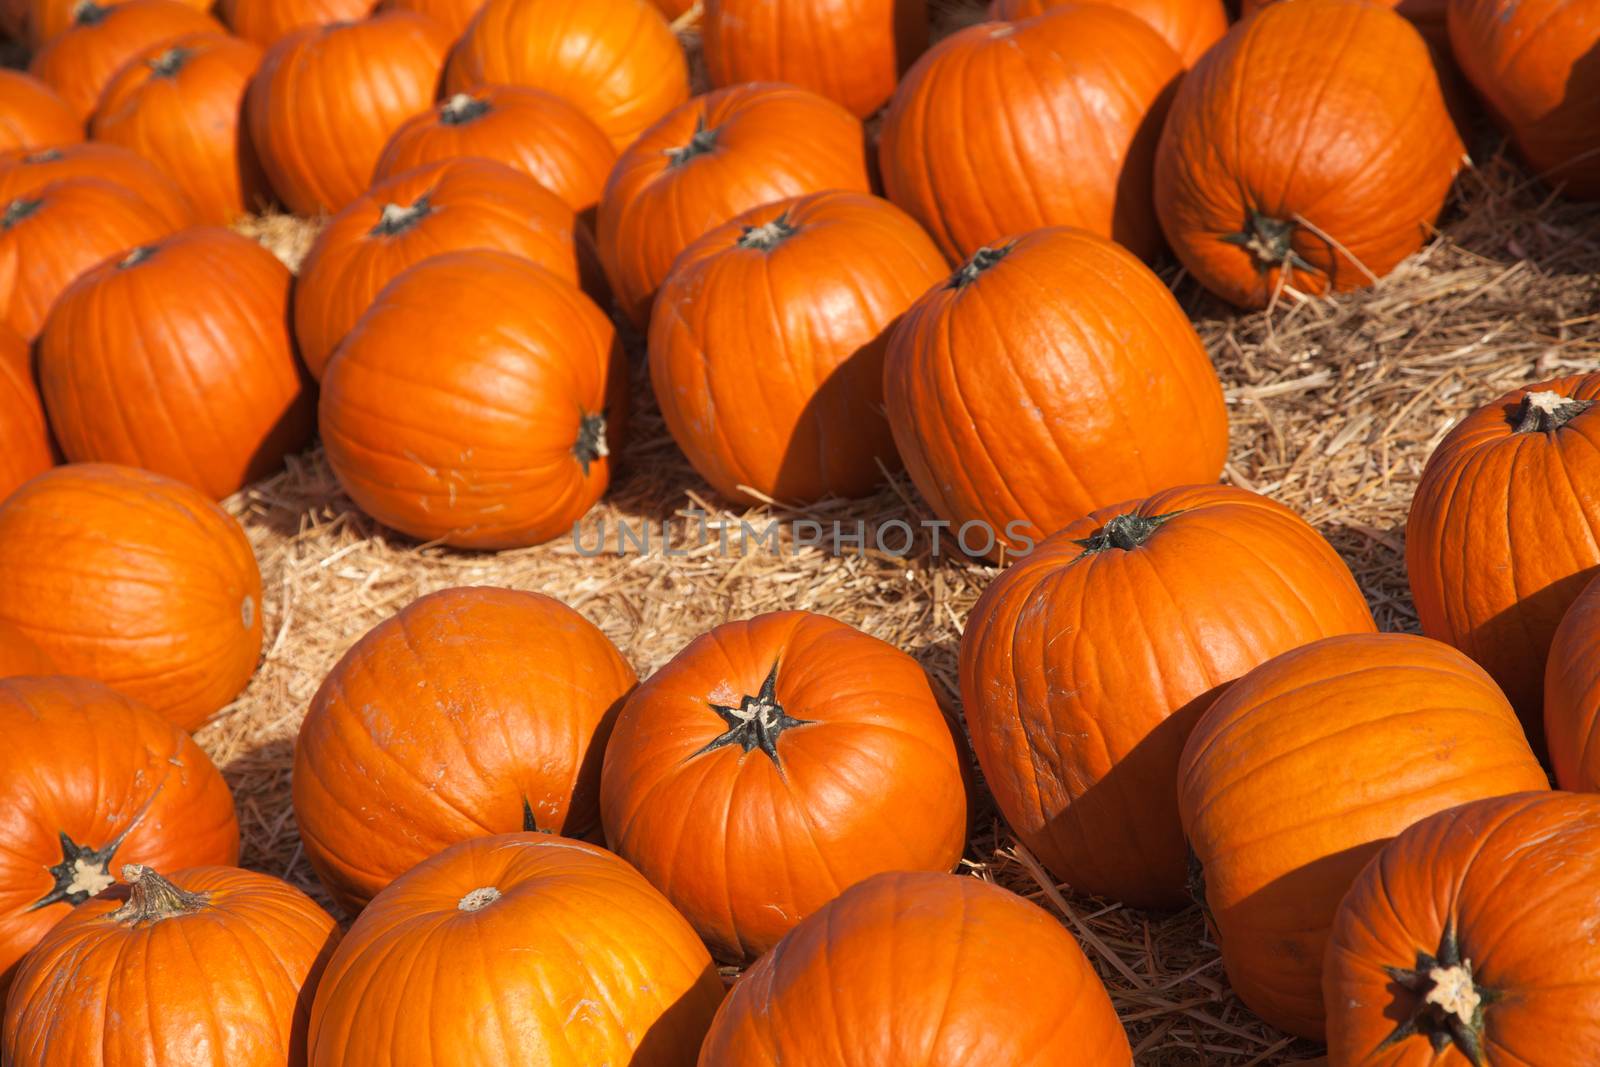 Fresh Orange Pumpkins and Hay in a Rustic Outdoor Fall Setting by Feverpitched